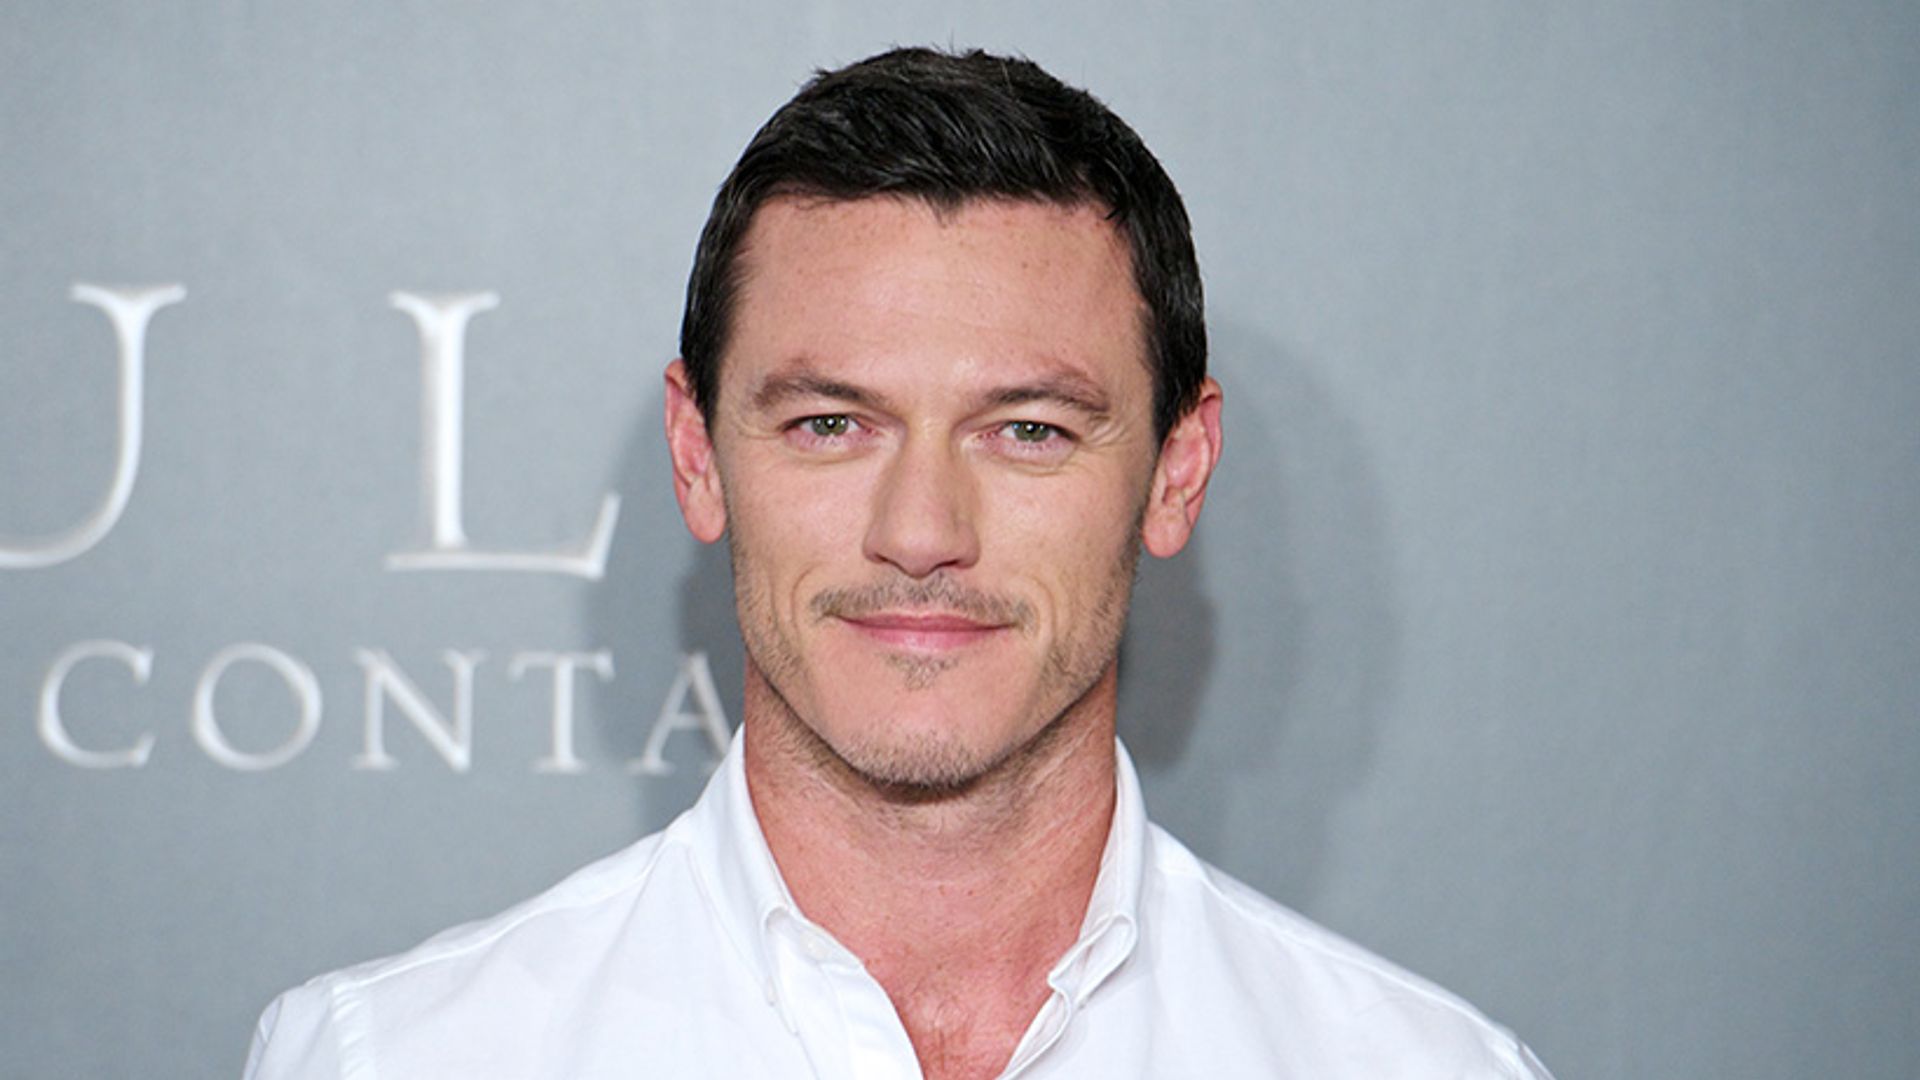 Luke Evans goes blonde! Check out his dramatic new look